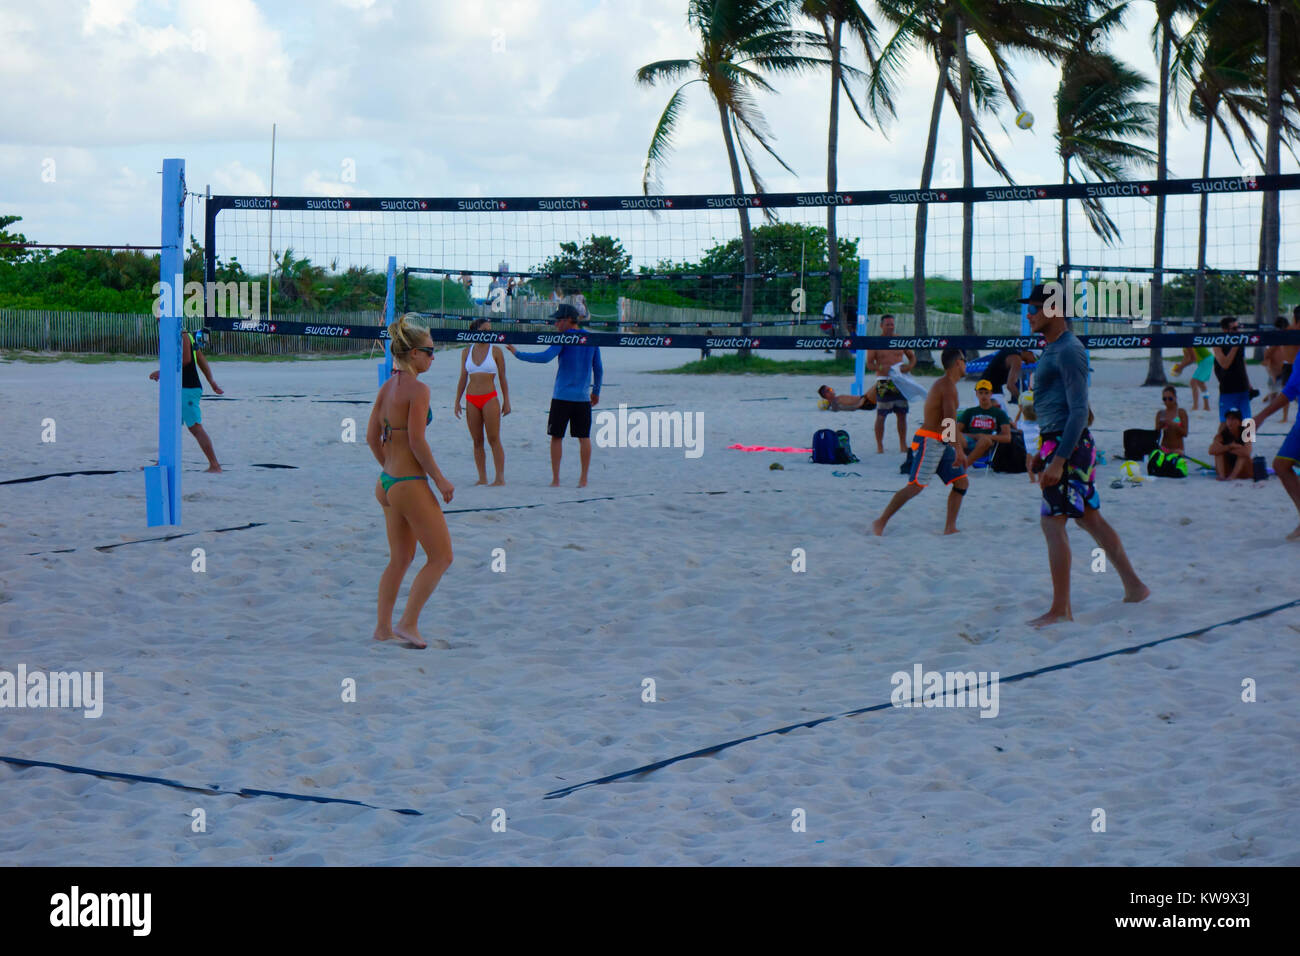 Young People Playing Volleyball, Lummus Park, Miami Beach, USA Stock Photo